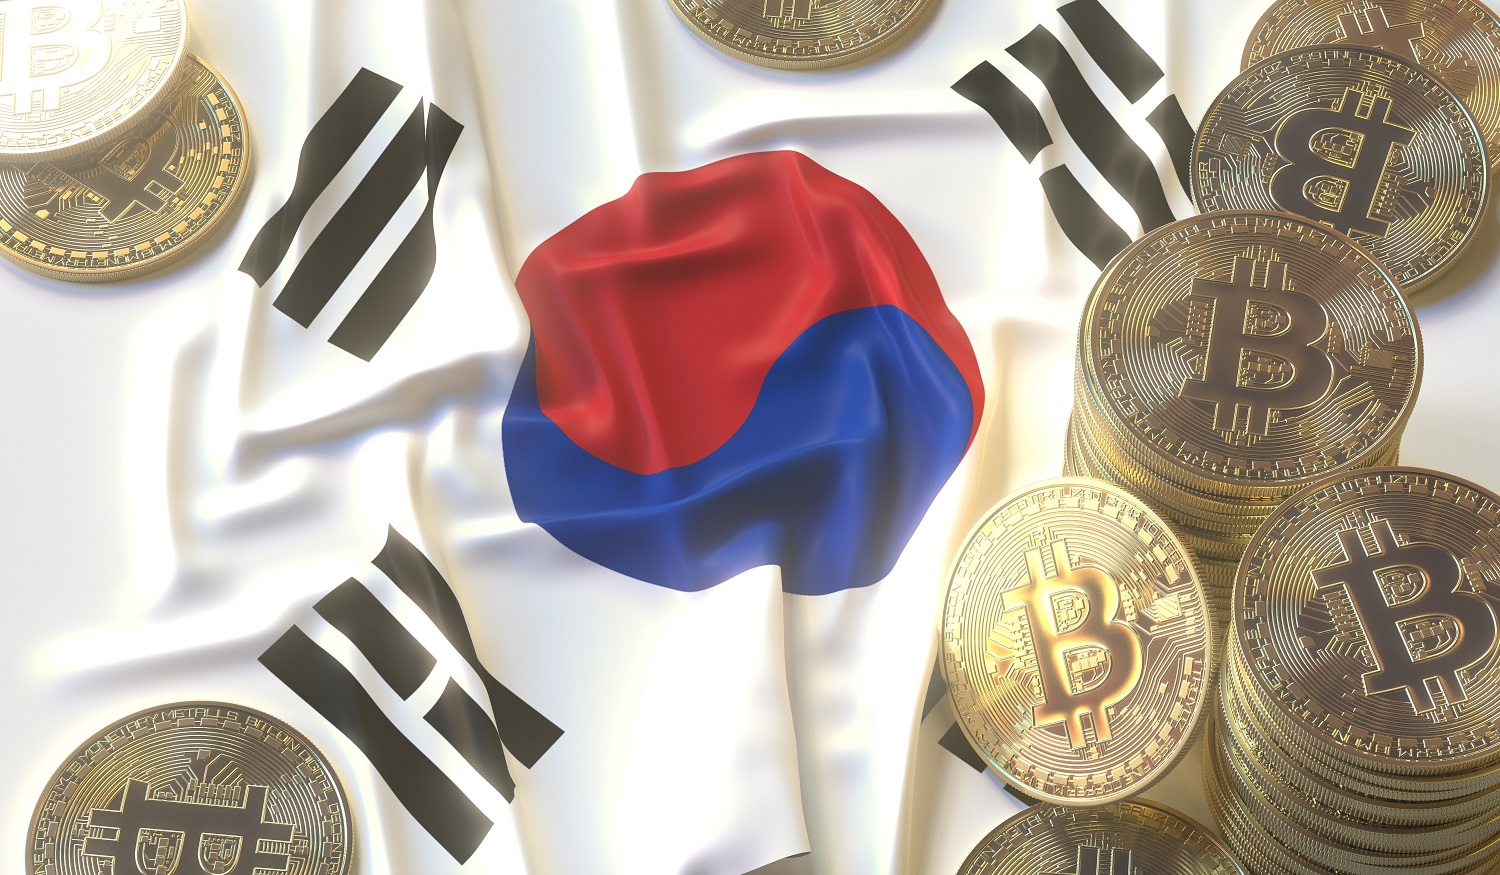 Piles of metal tokens intended to represent Bitcoin on a South Korean flag.